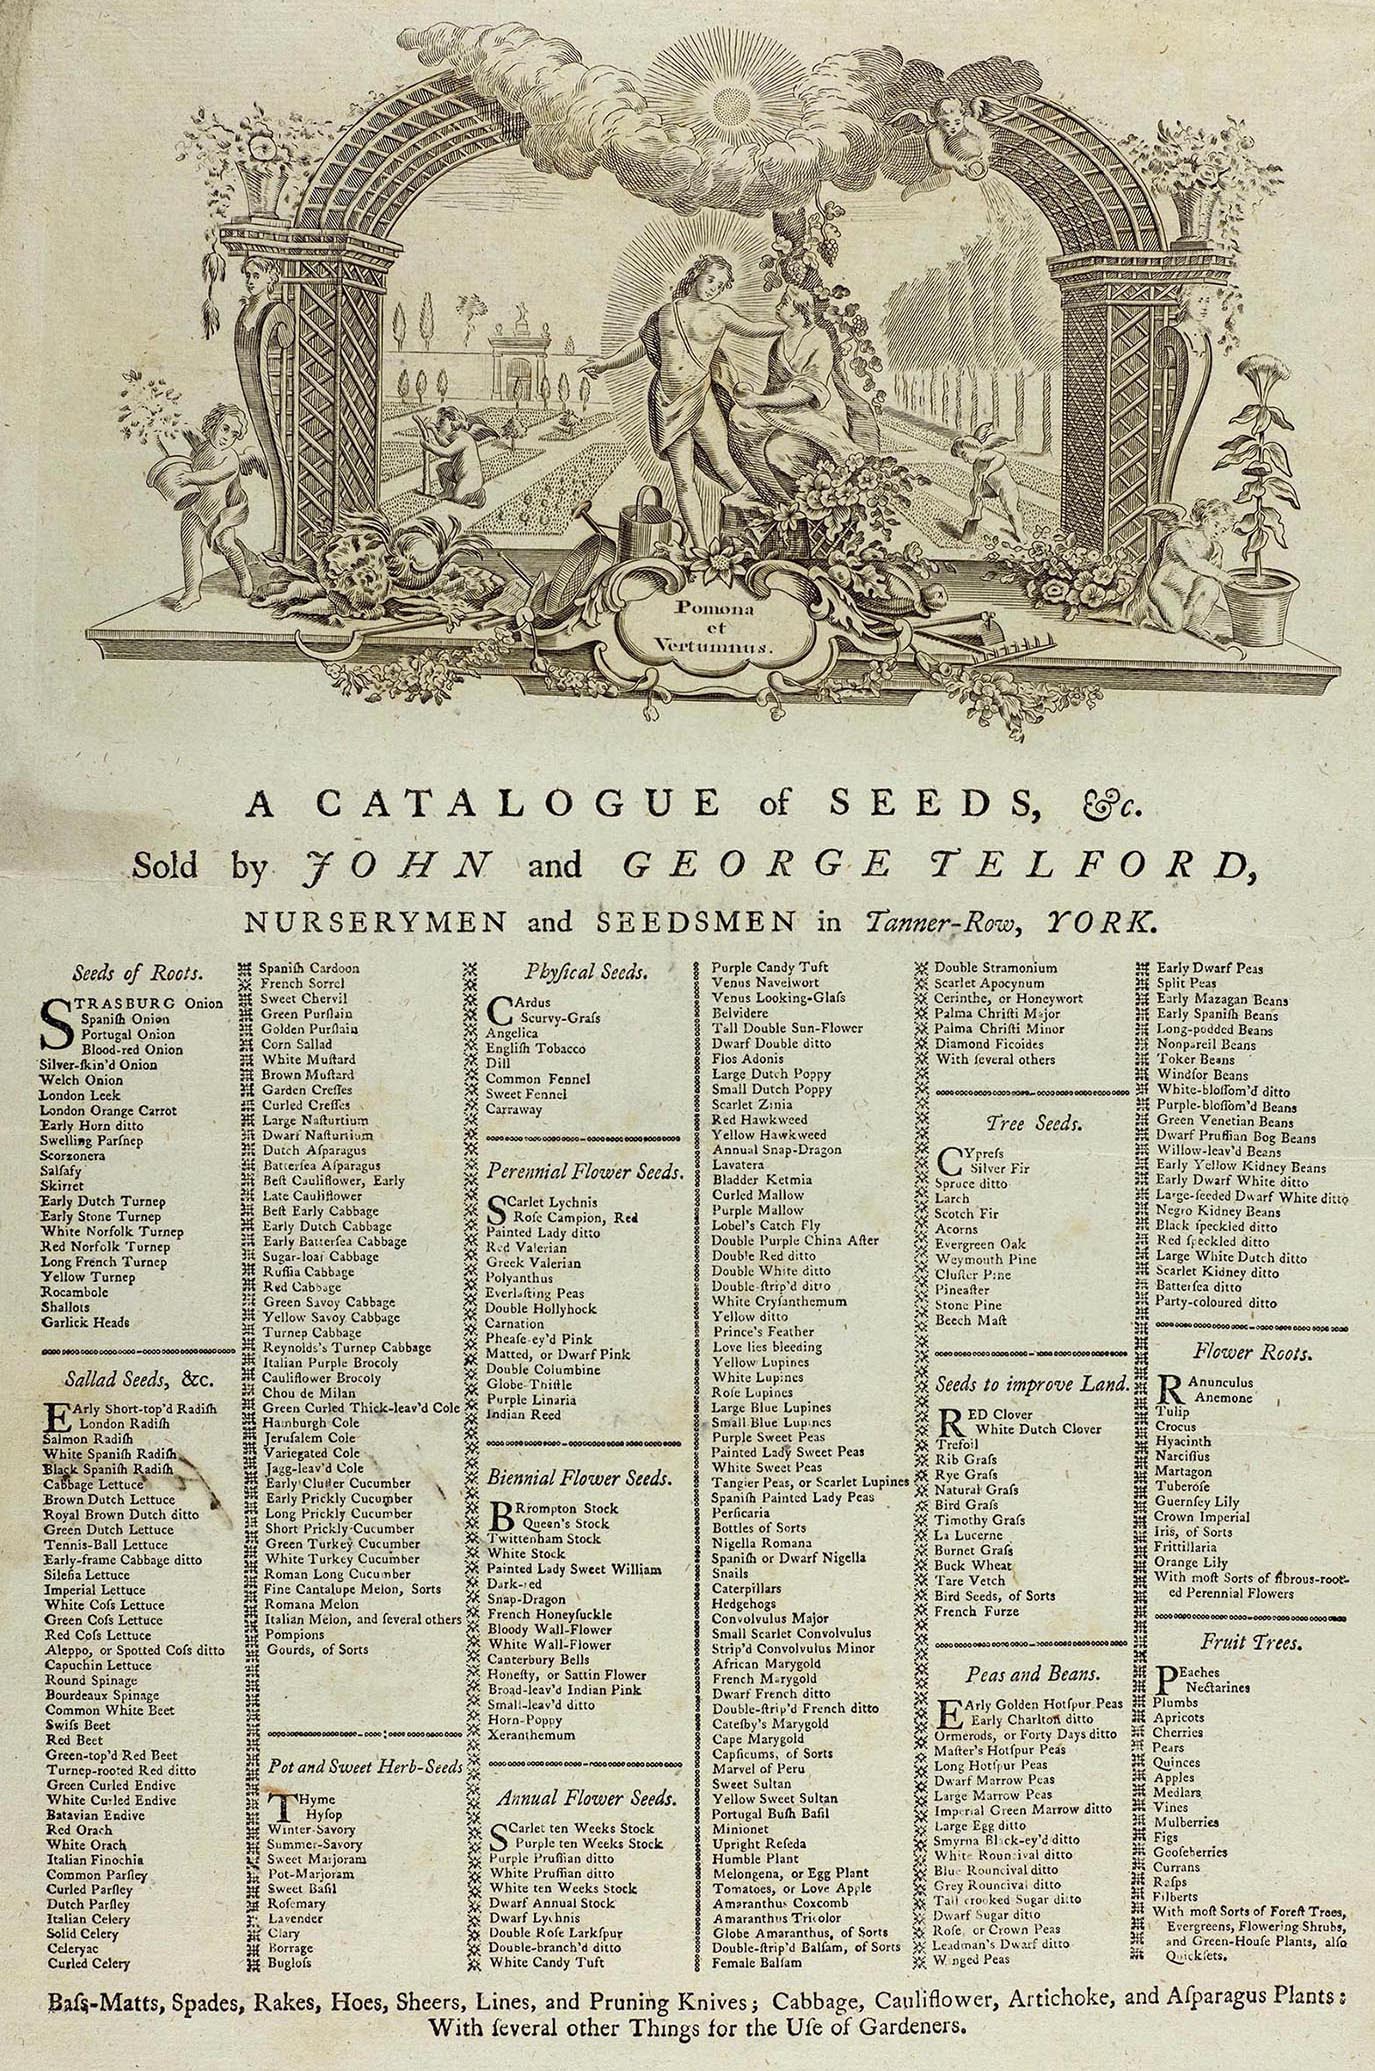 Telford’s of York catalogue of seeds from the 18th century, from the Darley family of Aldby archive.